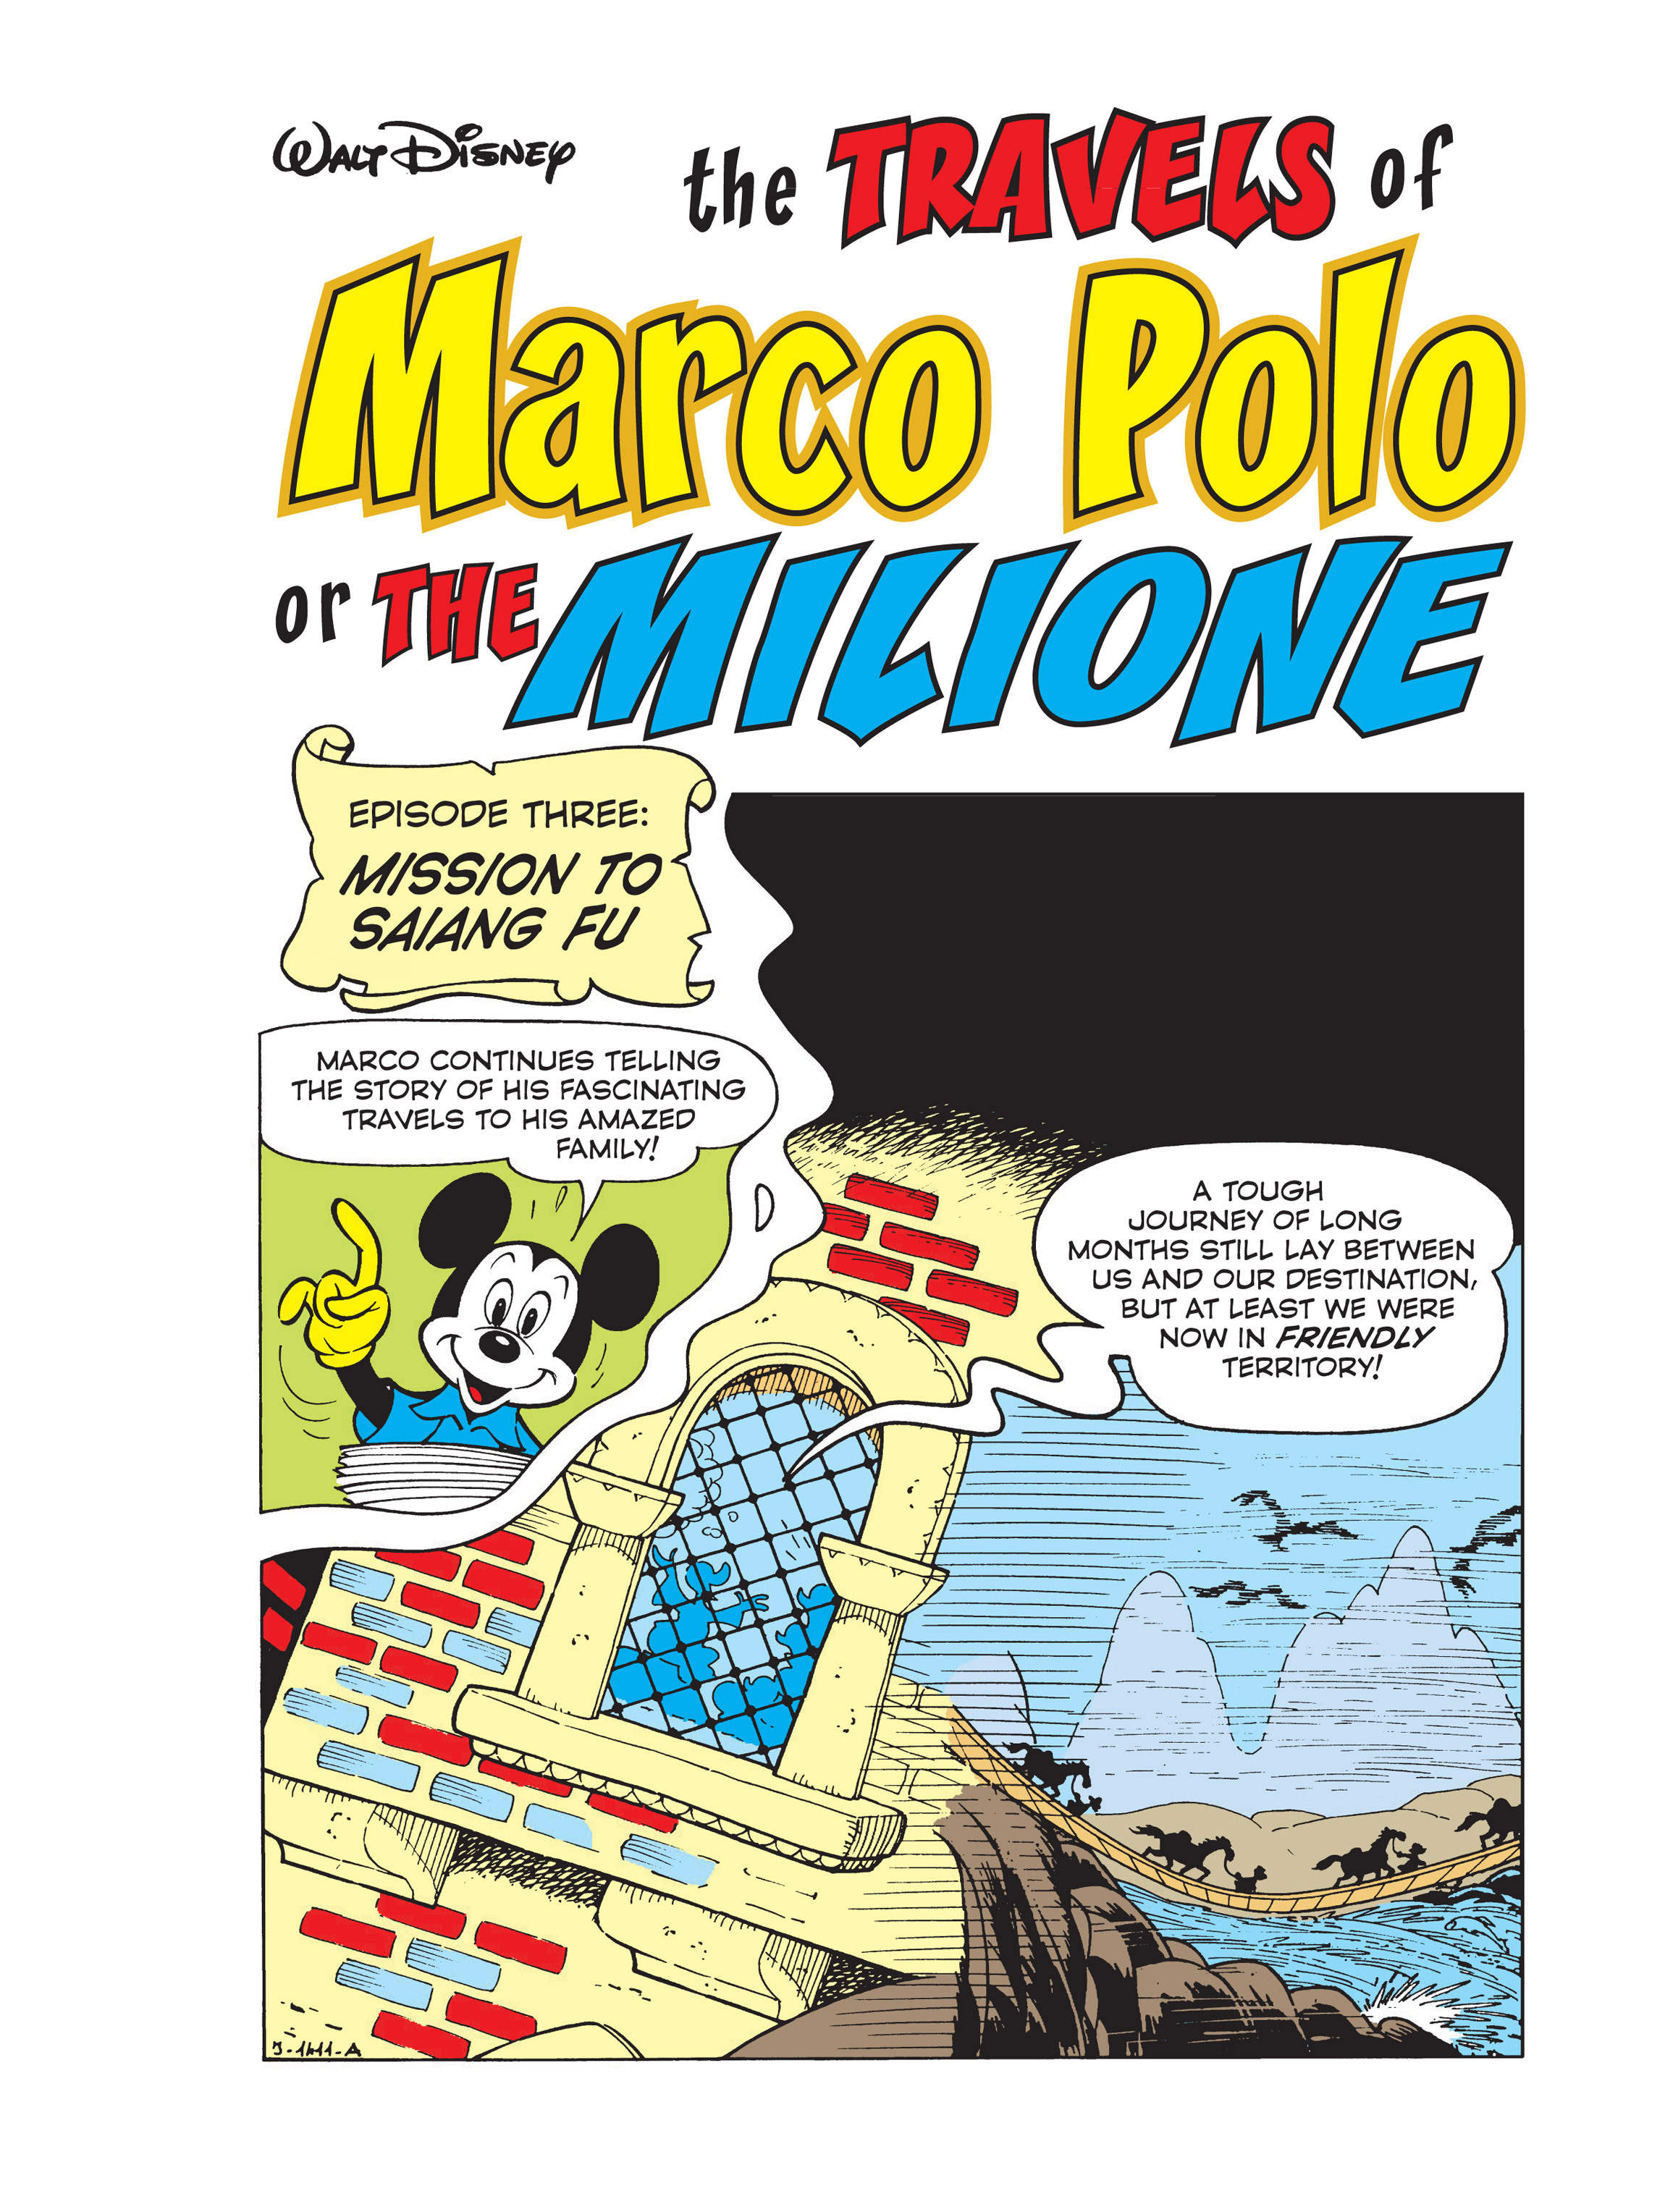 Read online The Travels of Marco Polo or the Milione comic -  Issue #3 - 2